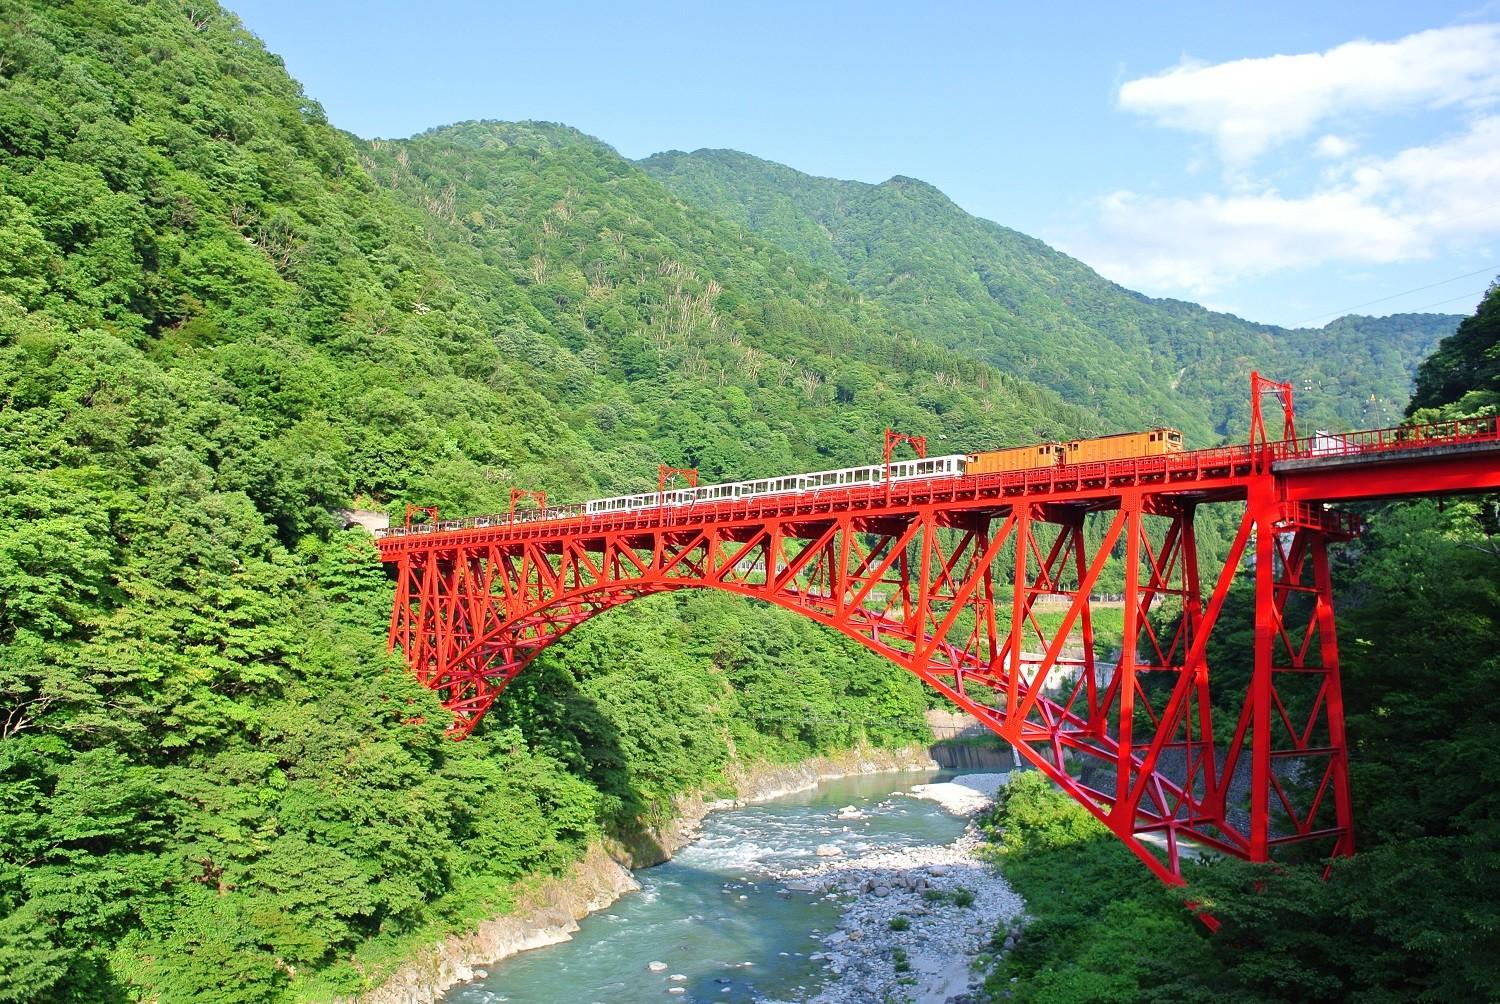 Kurobe Gorge: Secluded Hot Springs, Scenic Walks, and Spectacular Scenery